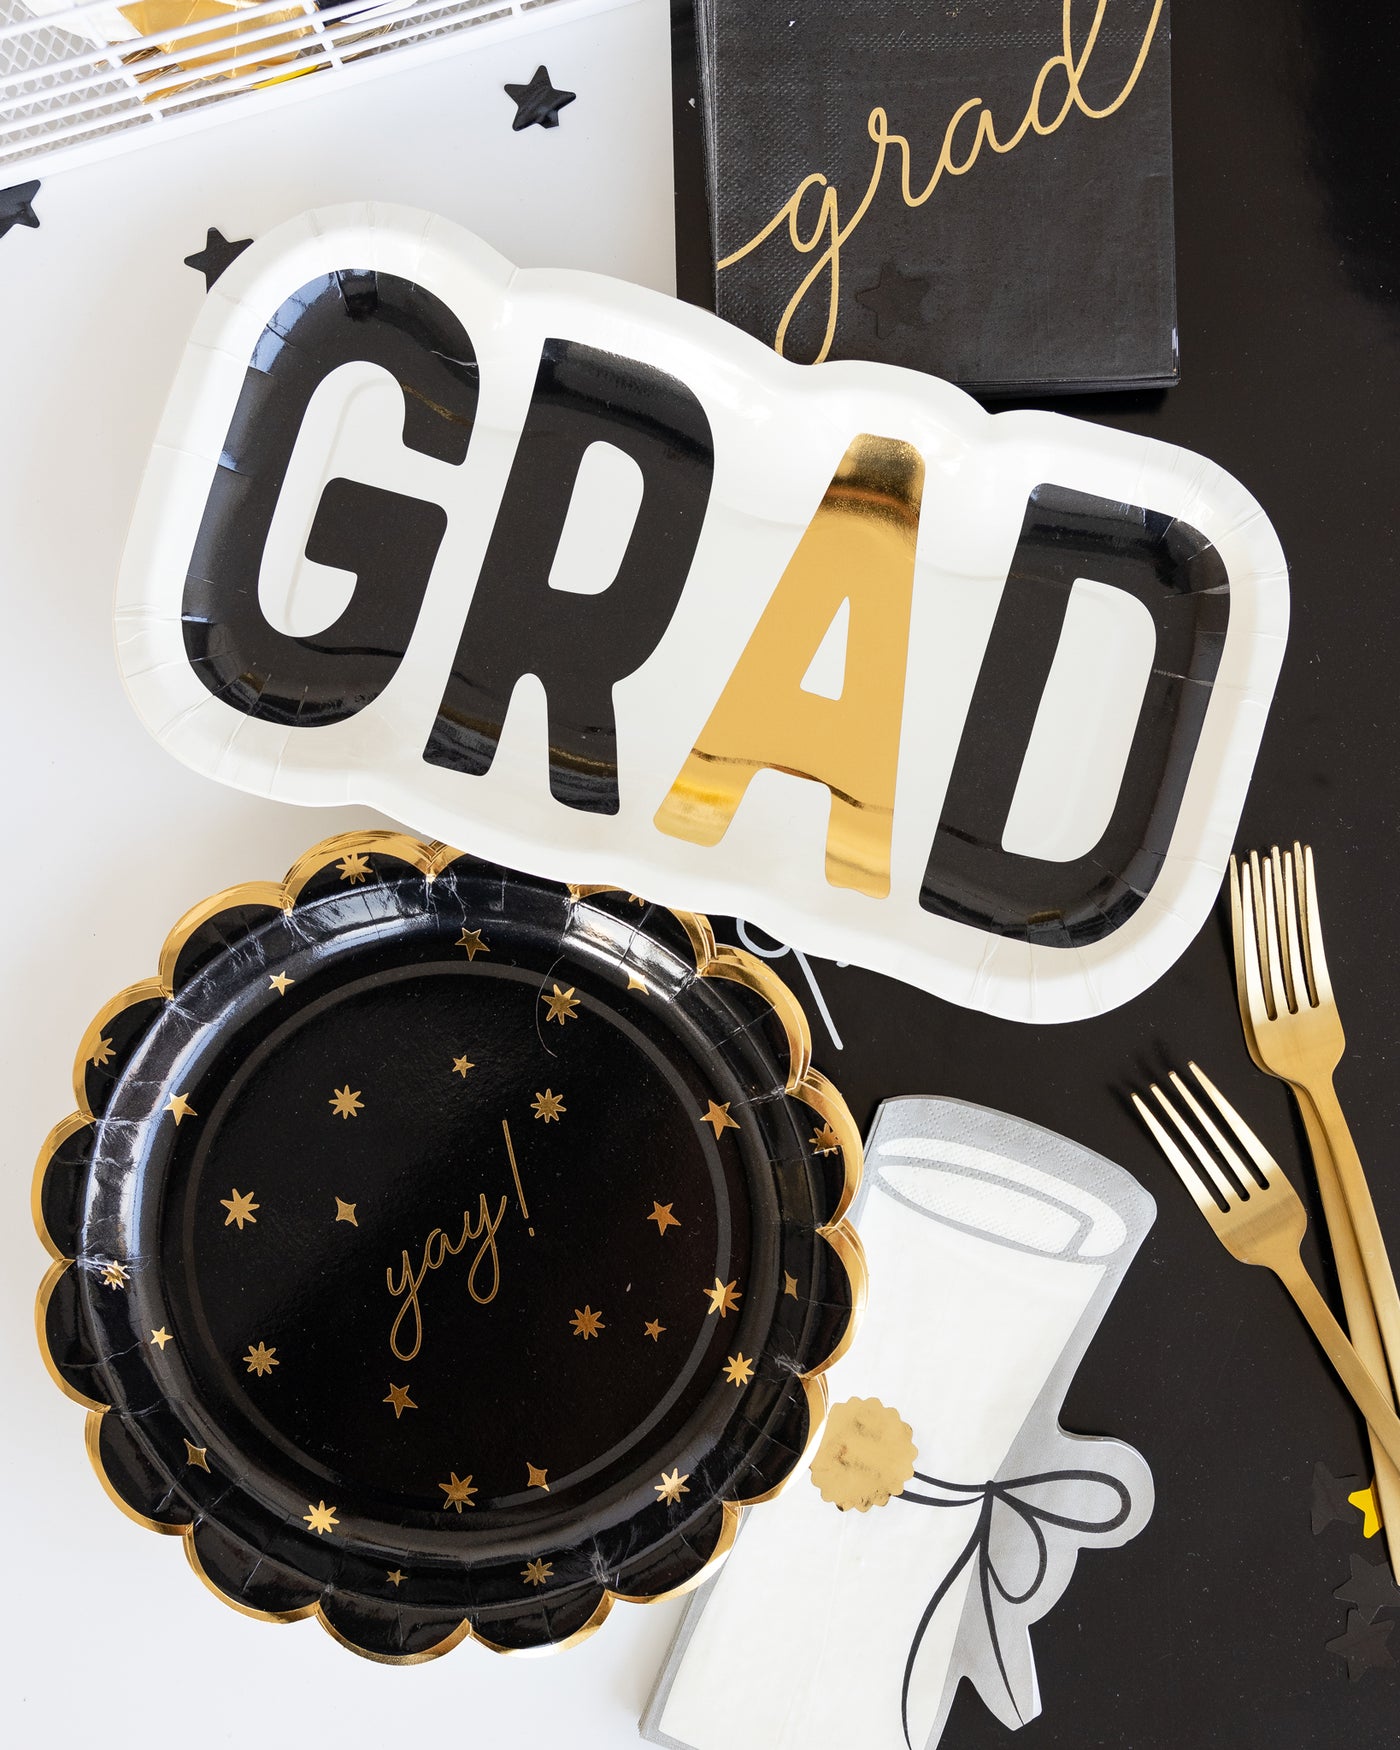 GRD1041 - Yay Star Paper Plate